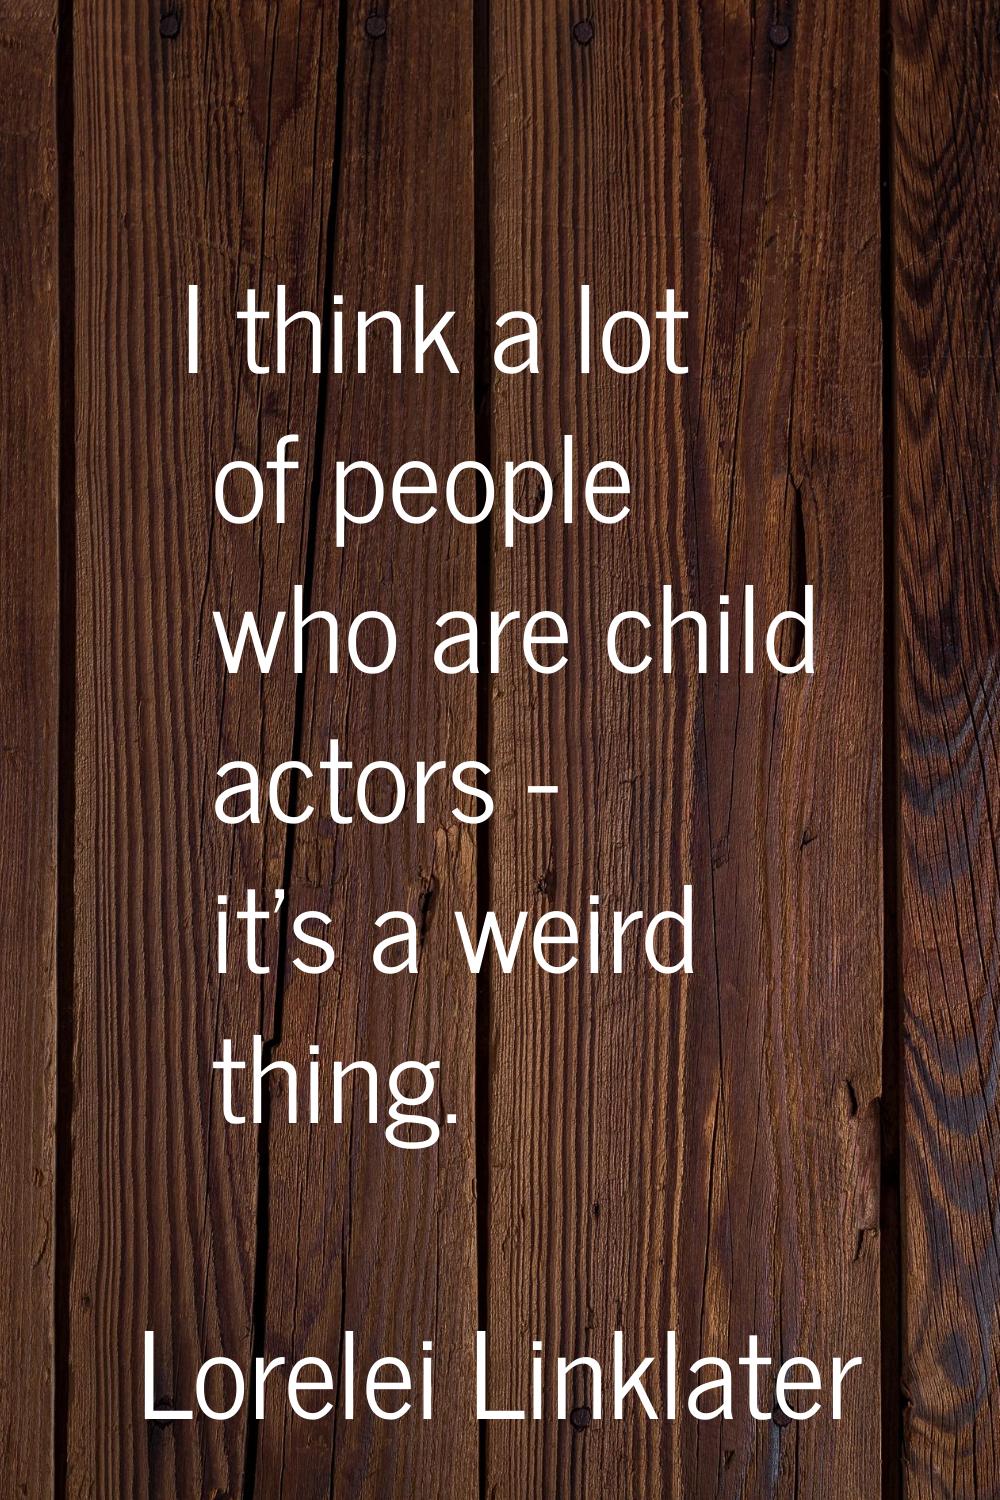 I think a lot of people who are child actors - it's a weird thing.